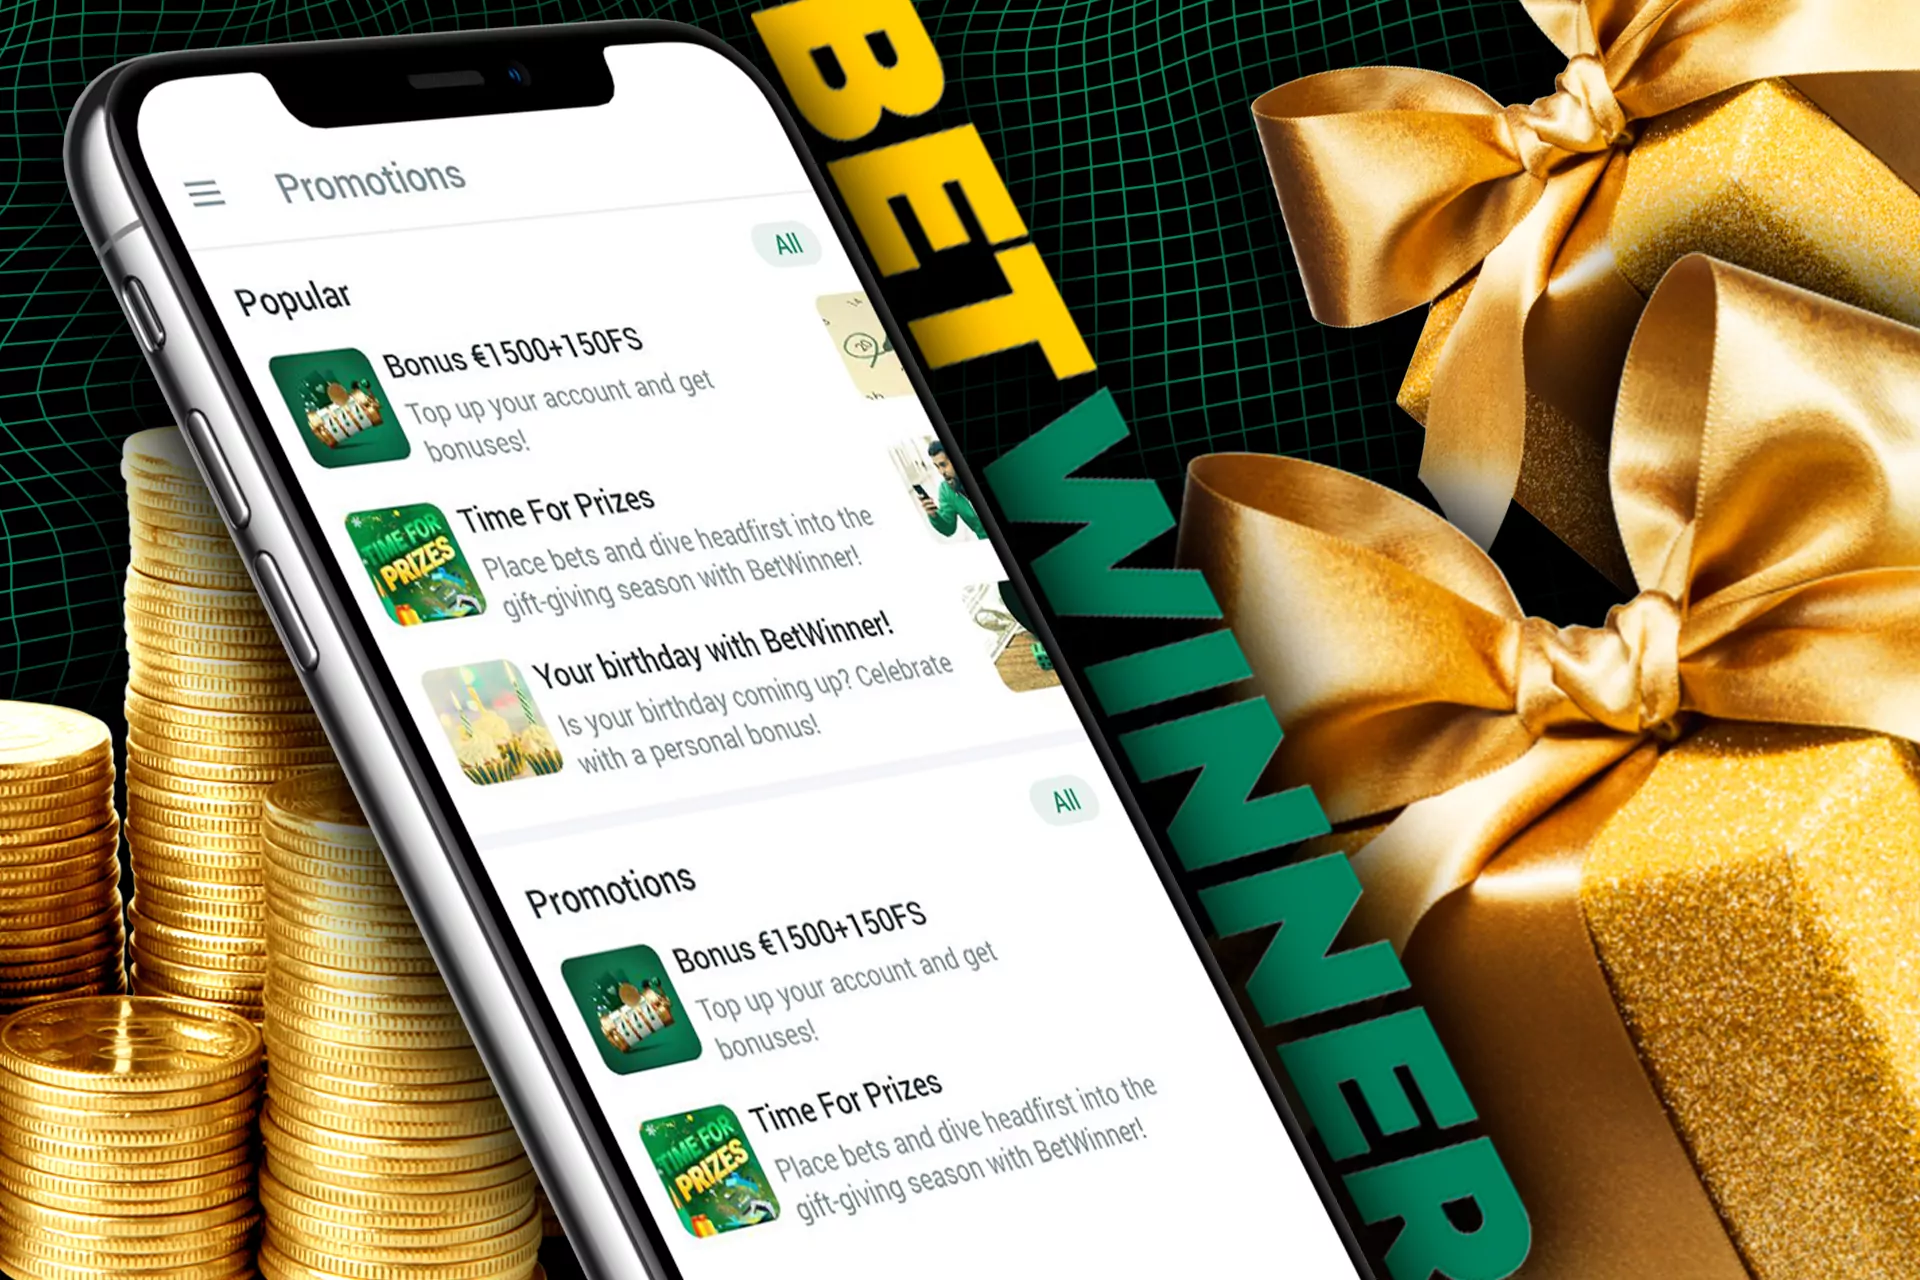 In the Betwinner app, you can easily place bets, follow new bonuses and promotional offers, make deposits and withdraw winnings.